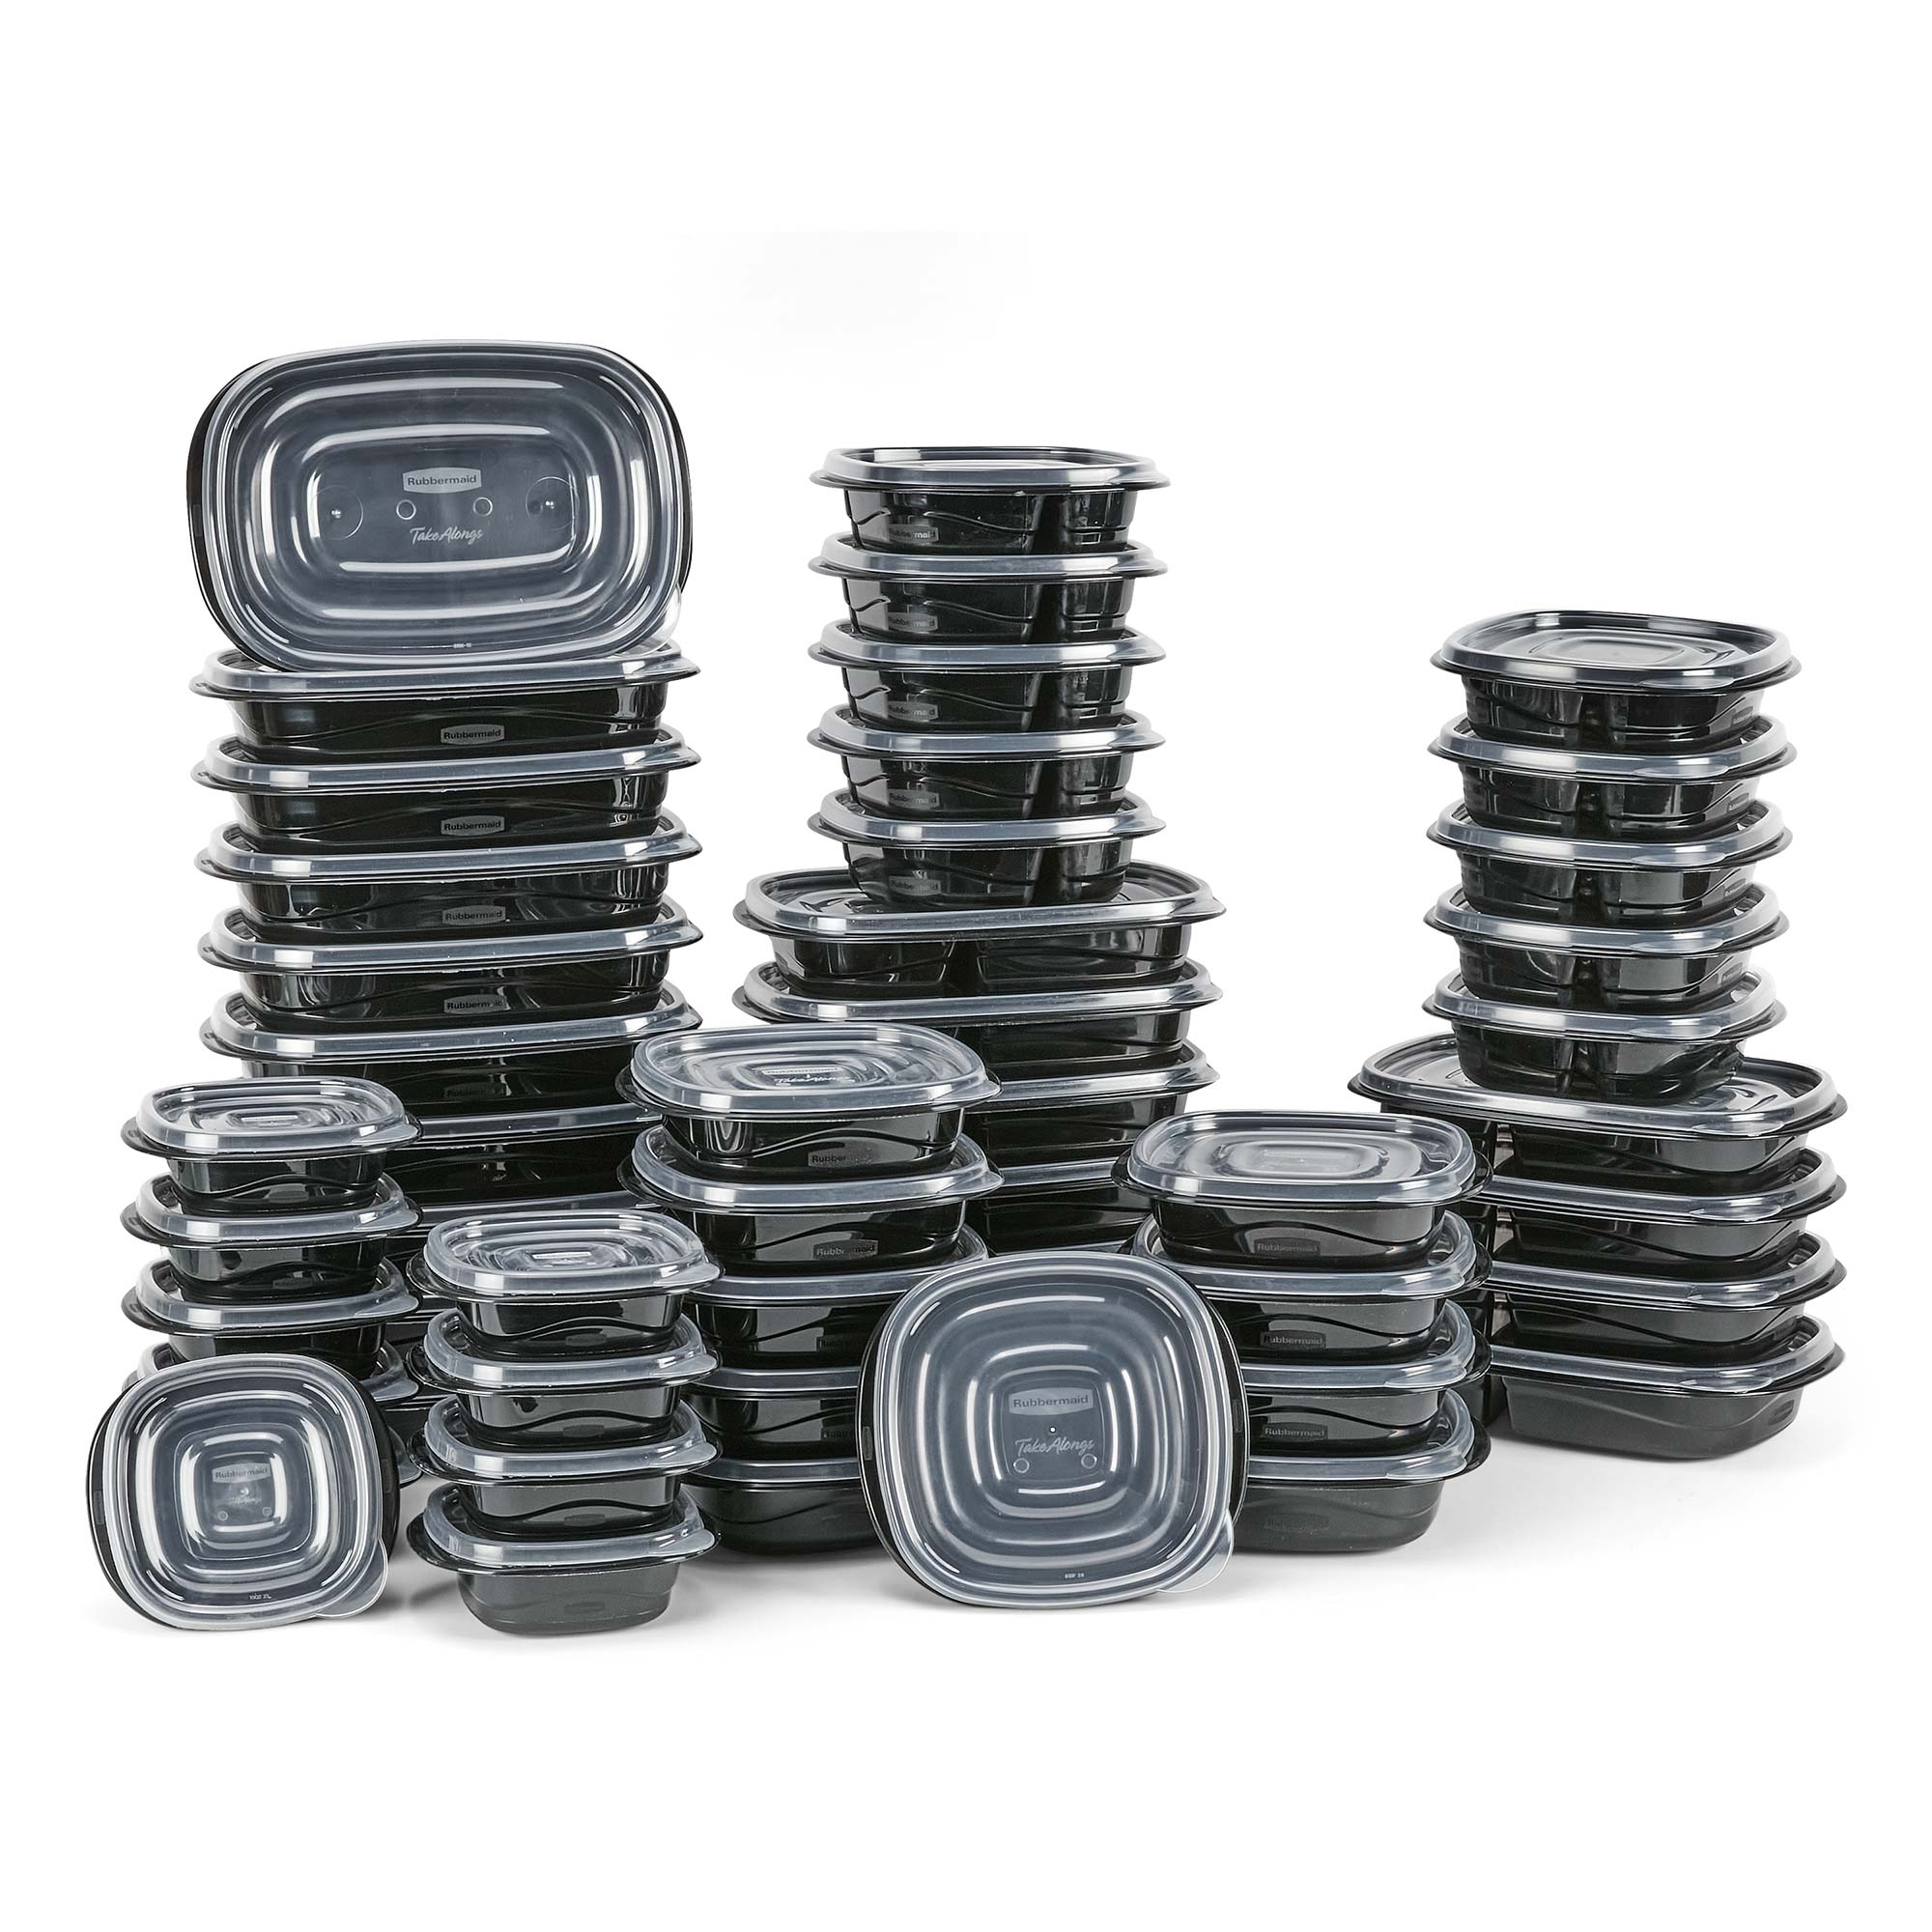 3 Rubbermaid TakeAlongs Meal Prep Storage Containers Black Clear